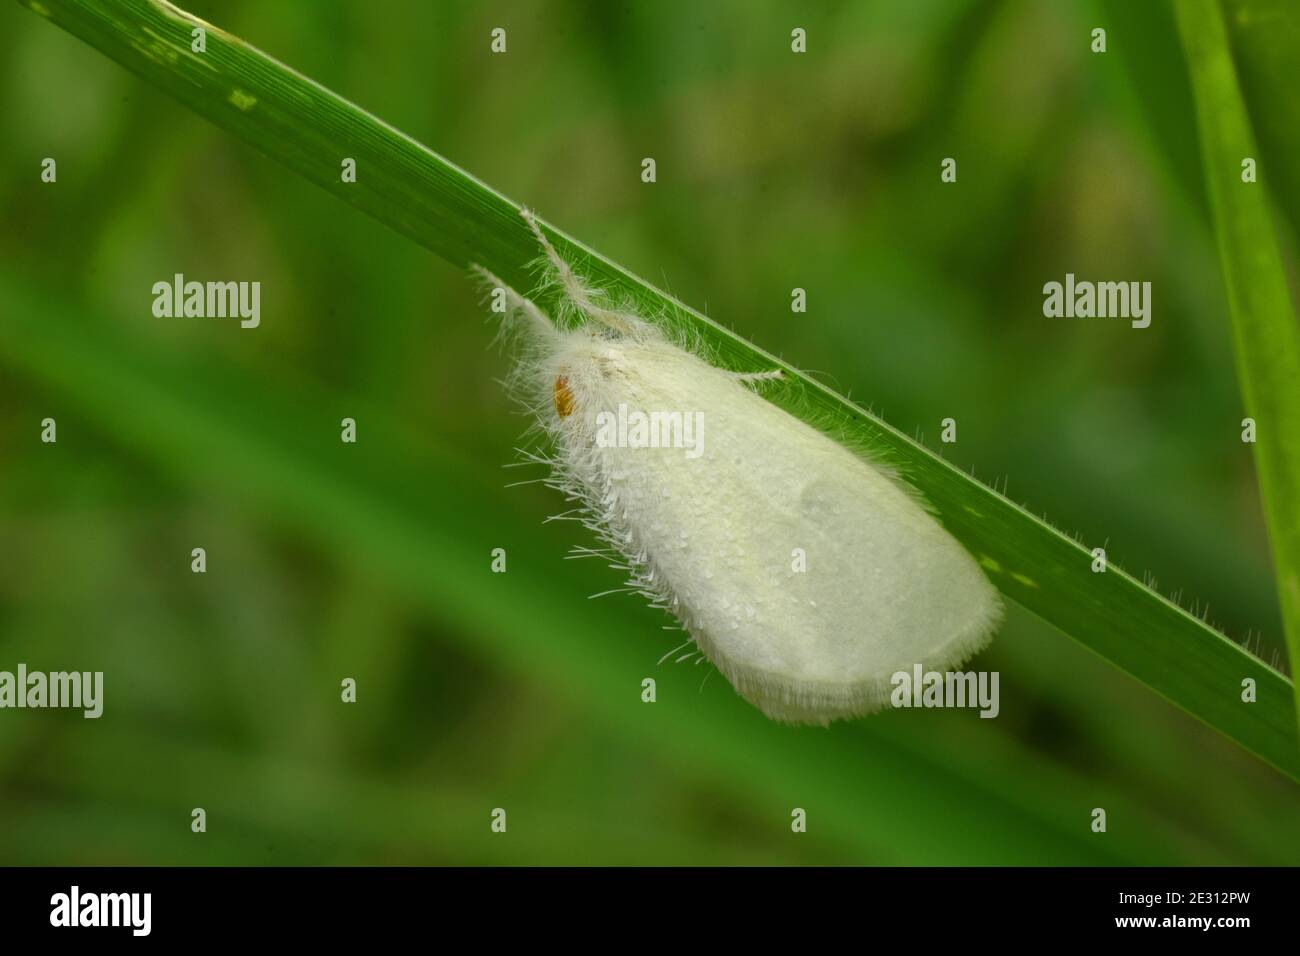 A small size white moth rest on green grass Stock Photo